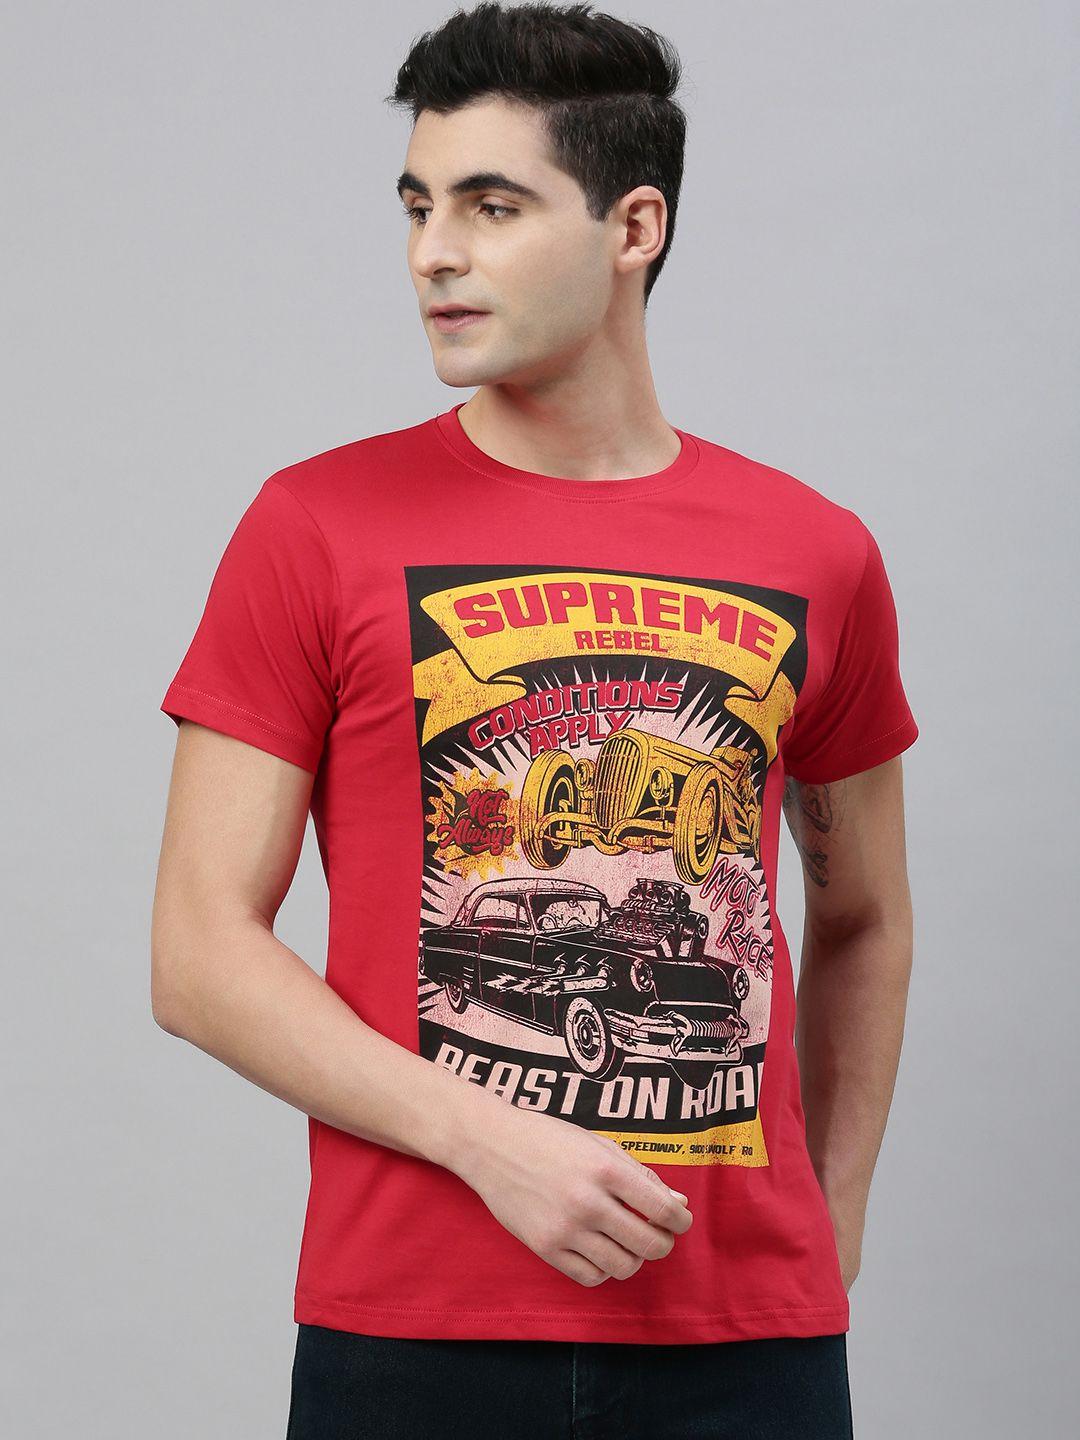 conditions-apply-men-red-printed-round-neck-t-shirt